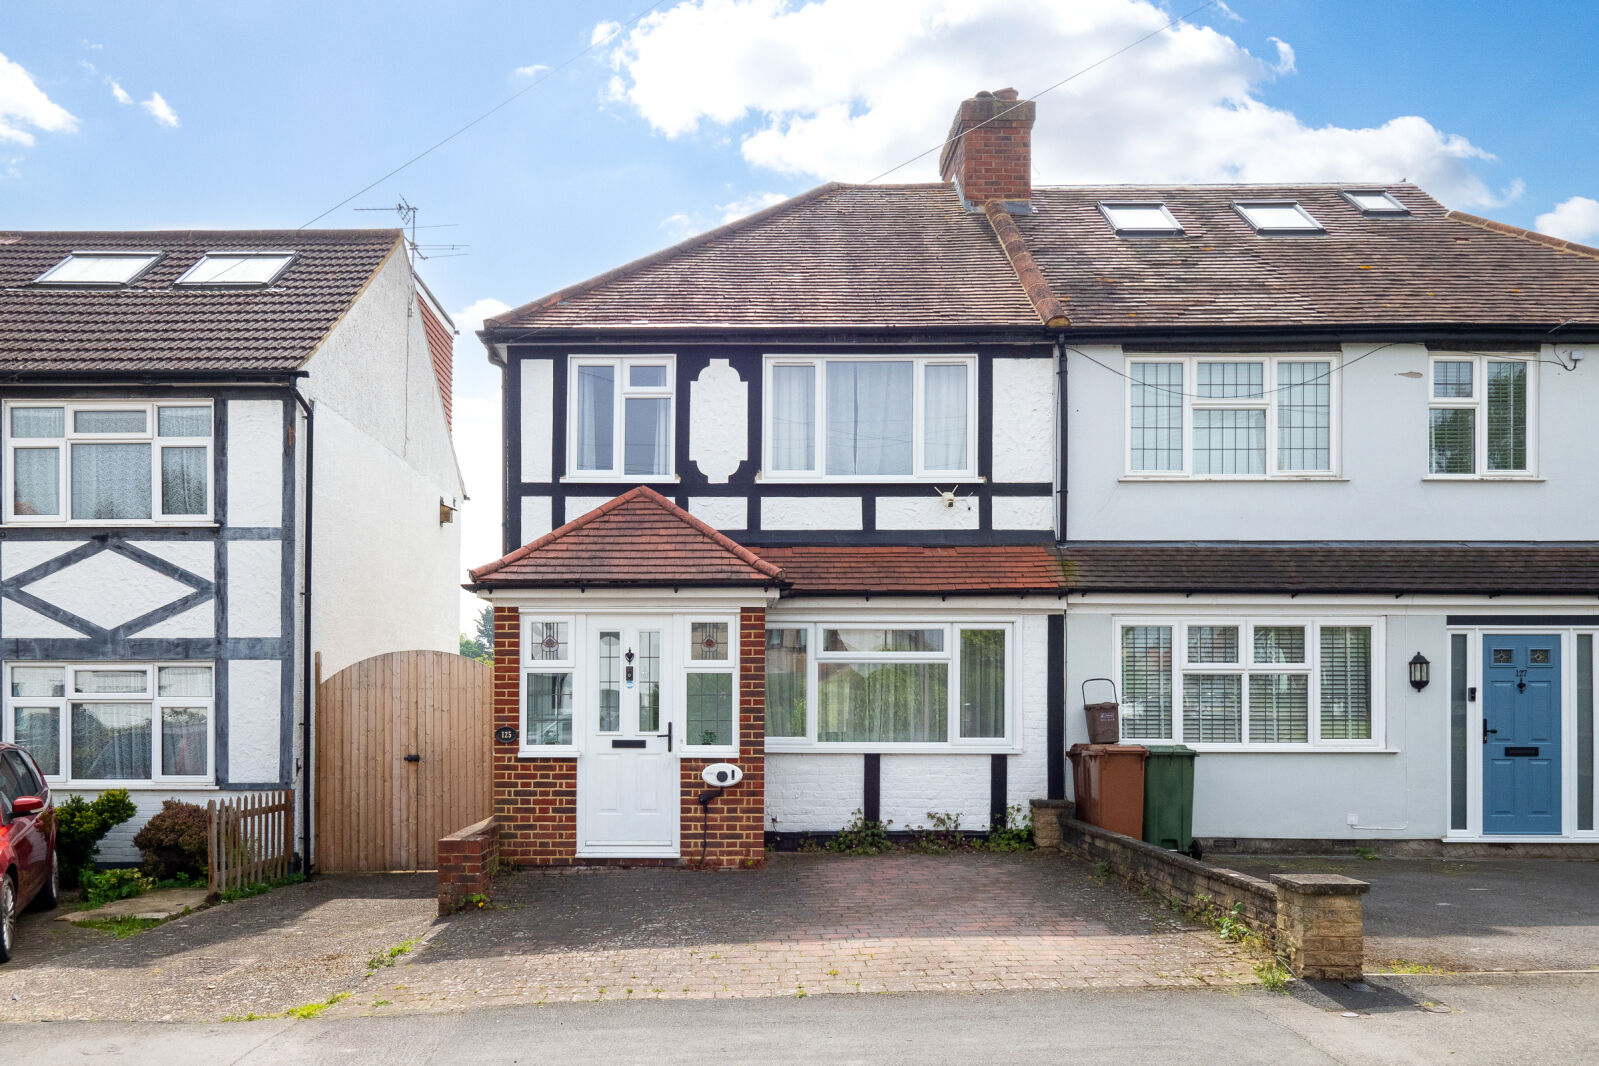 3 bedroom semi detached house to rent, Available from 10/07/2024 Frederick Road, Cheam, SM1, main image